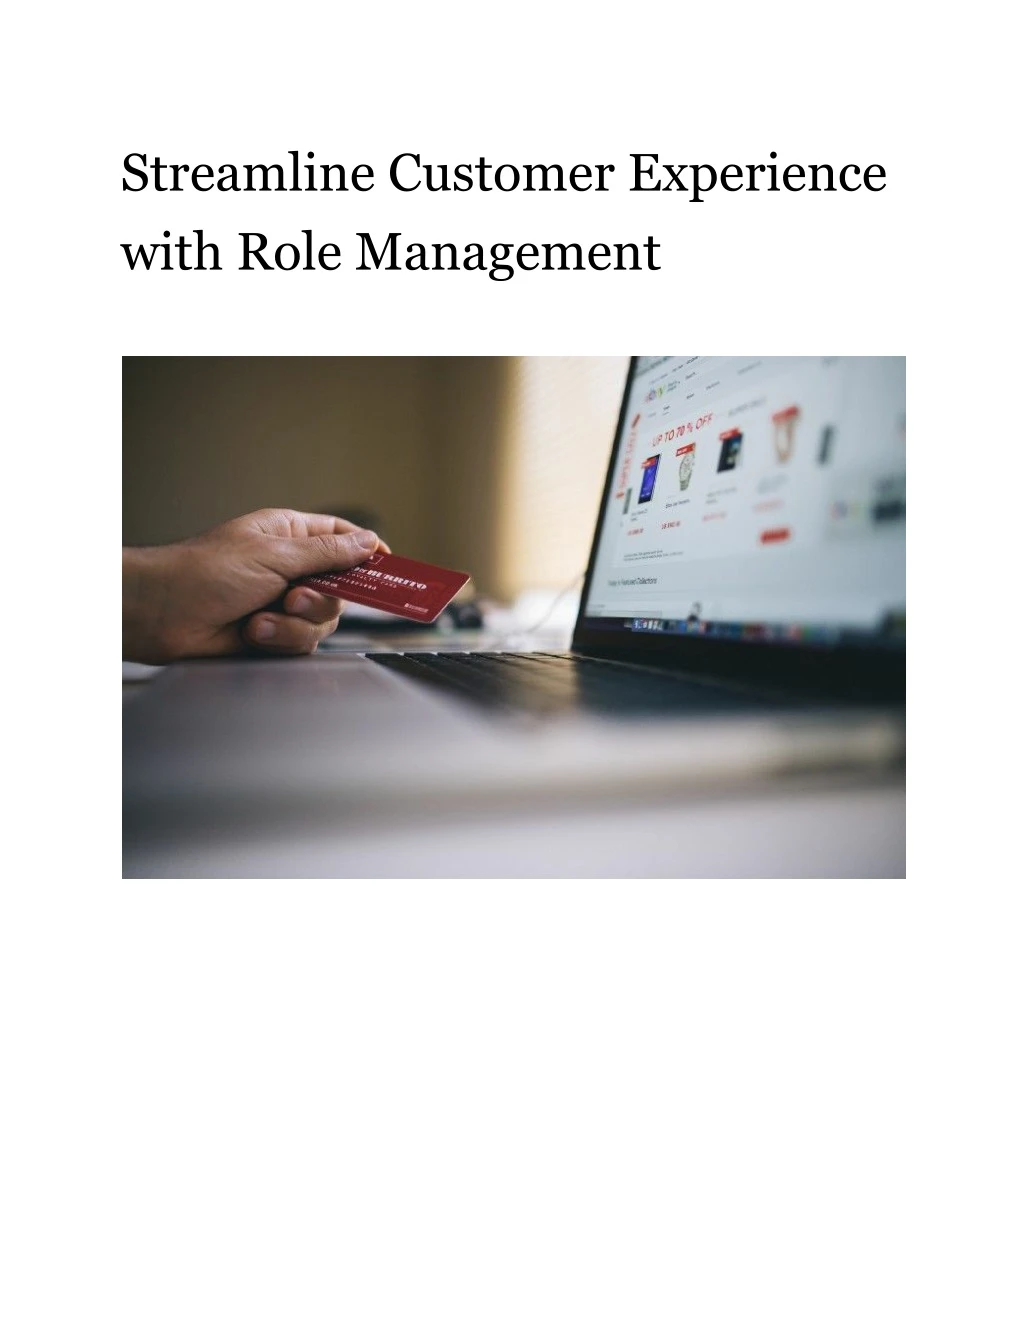 streamline customer experience with role